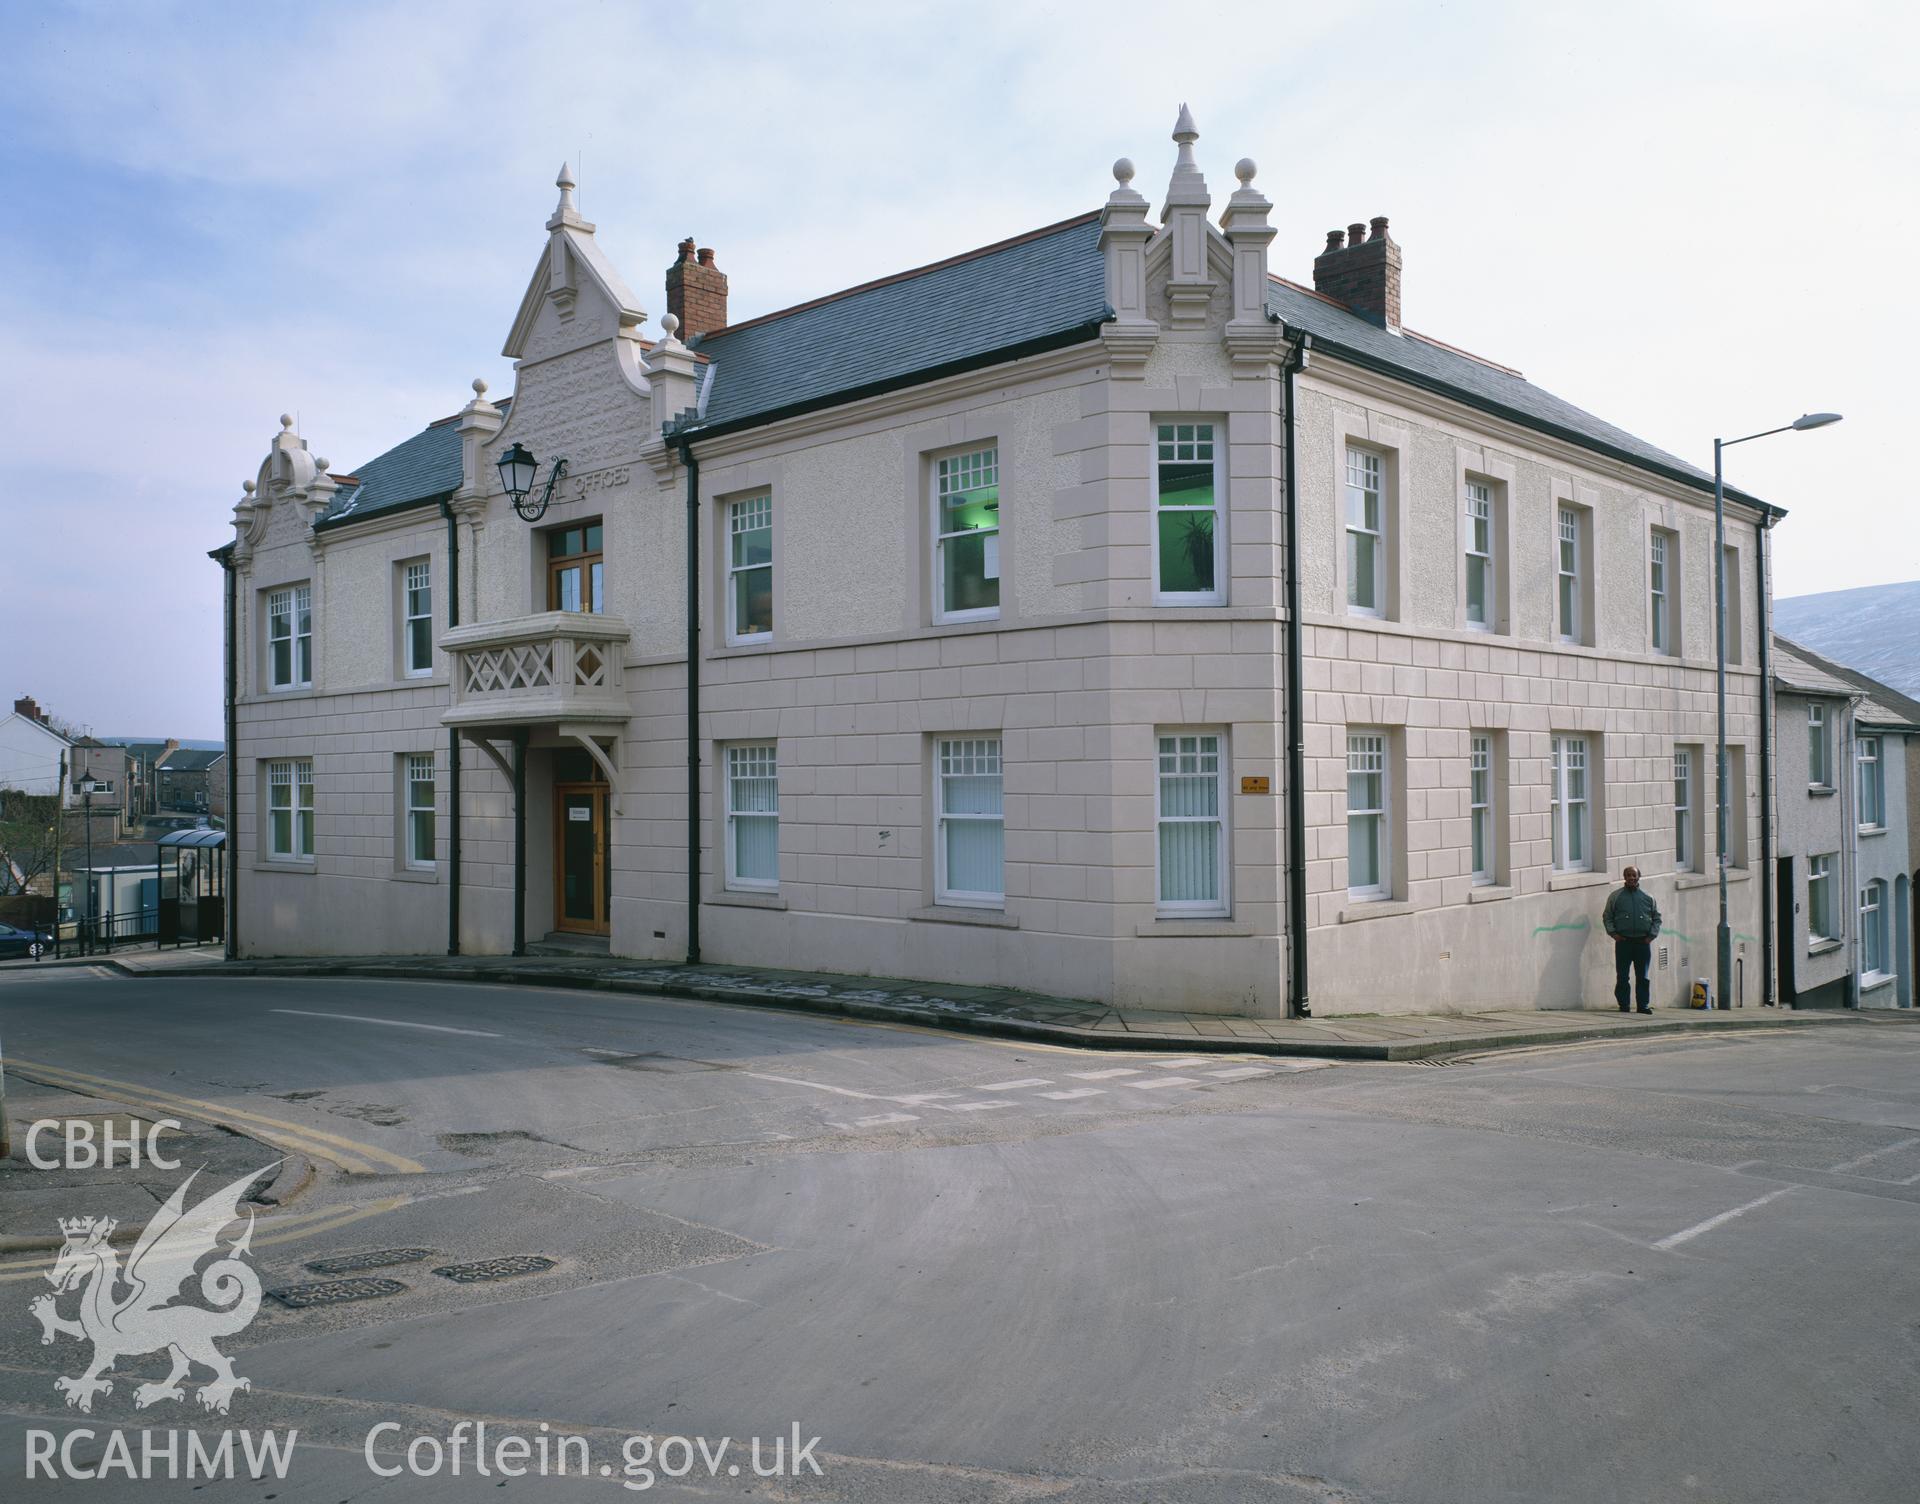 RCAHMW colour transparency showing Town Hall, Blaenavon.